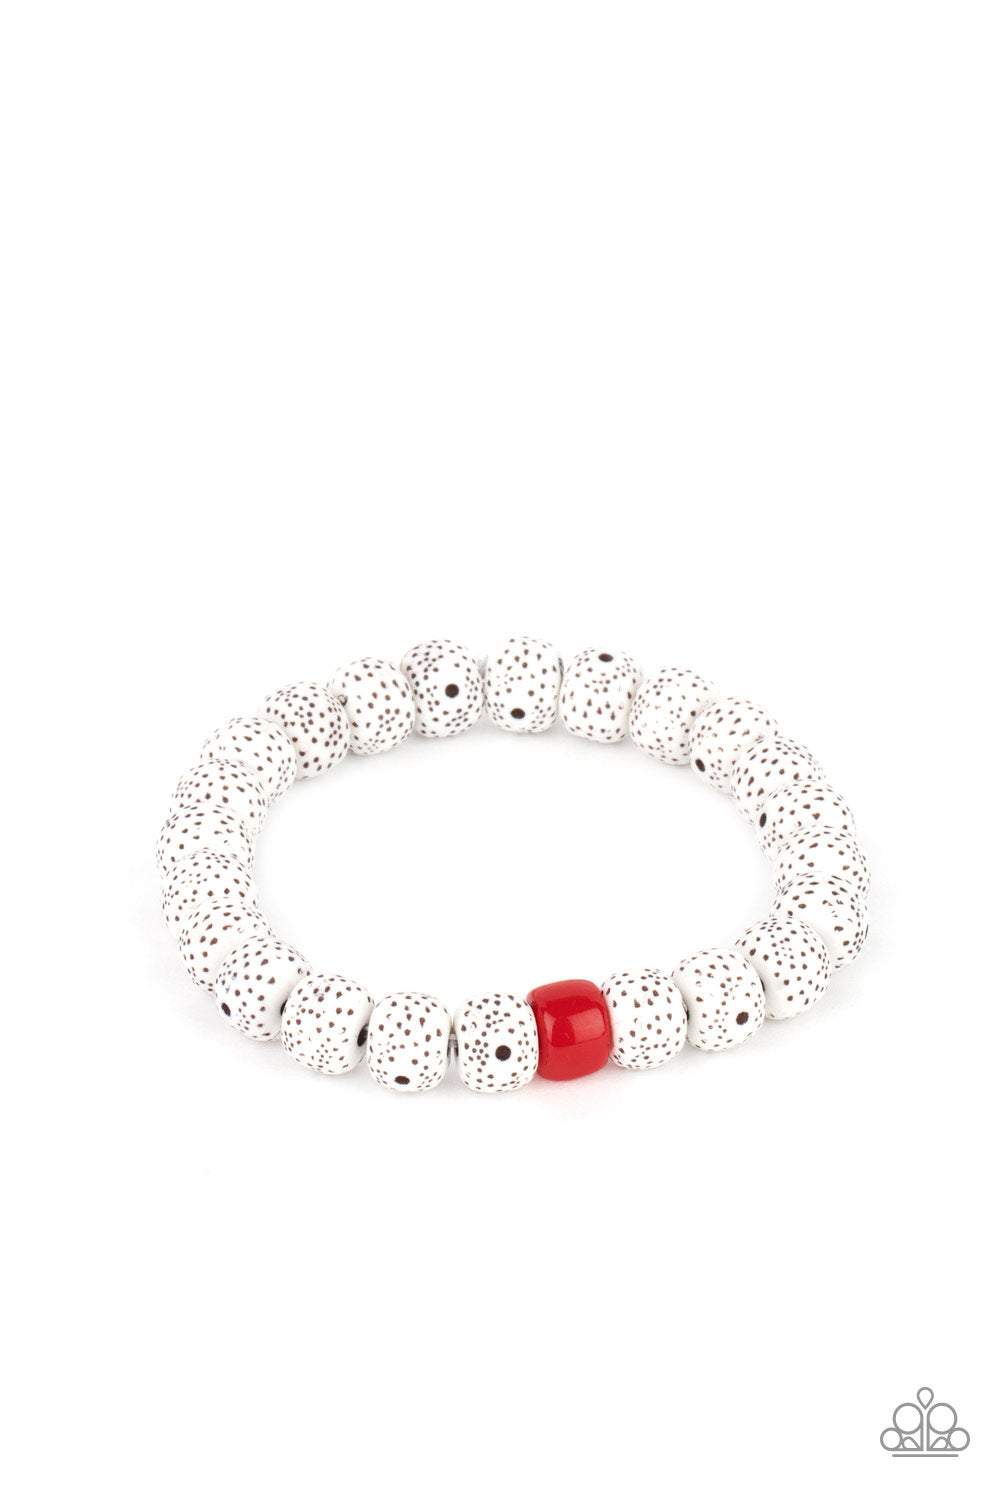 ZEN Second Rule Red Urban Bracelet - Paparazzi Accessories  Featuring a fiery red beaded centerpiece, a collection of dotted faux stone beads are threaded along a stretchy band around the wrist for an earthy effect.  All Paparazzi Accessories are lead free and nickel free!  Sold as one individual bracelet.